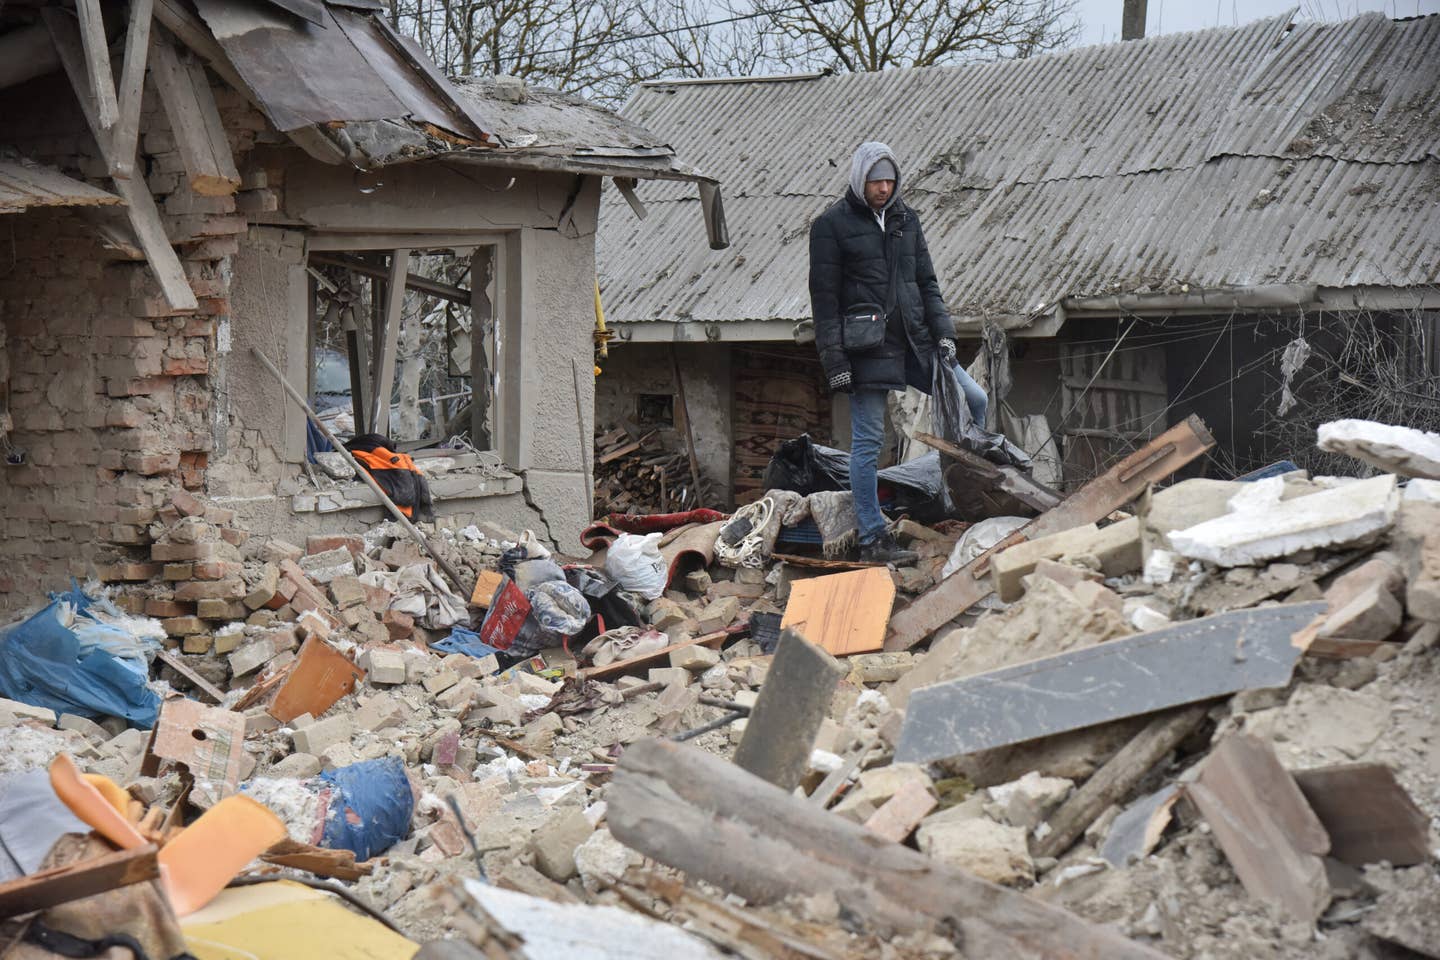 People disassemble houses destroyed by a Russian missile hitting a residential area in the village of Velika Vilshanytsia, Lviv Region, Ukraine on March 9, 2023. (Photo by Pavlo Palamarchuk/Anadolu Agency via Getty Images)